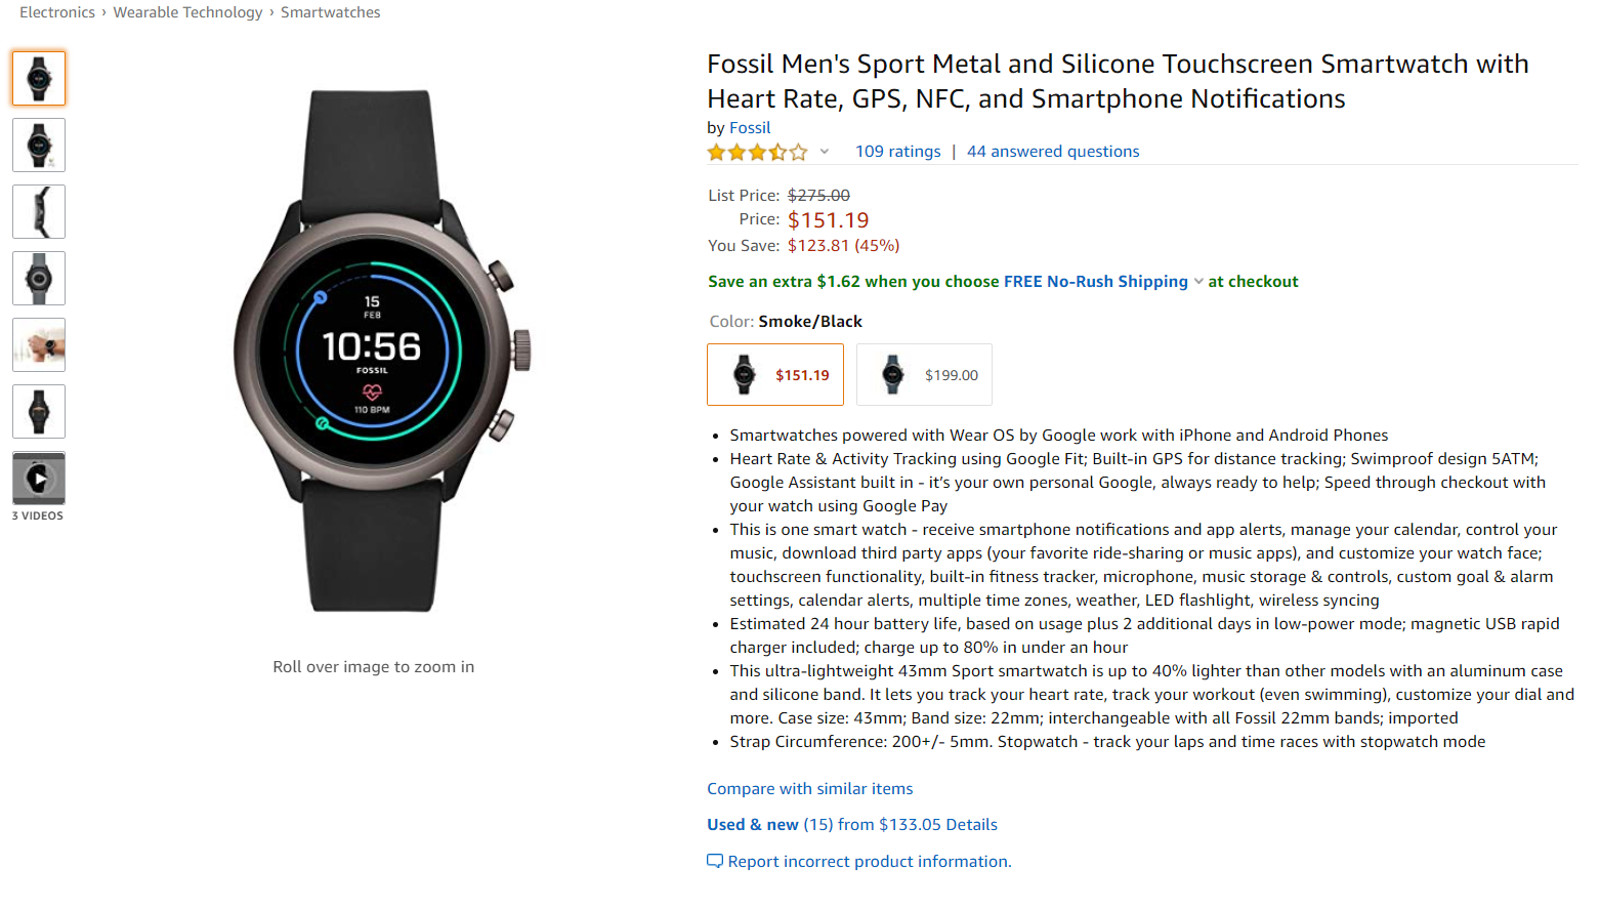 fossil sport amazon deal